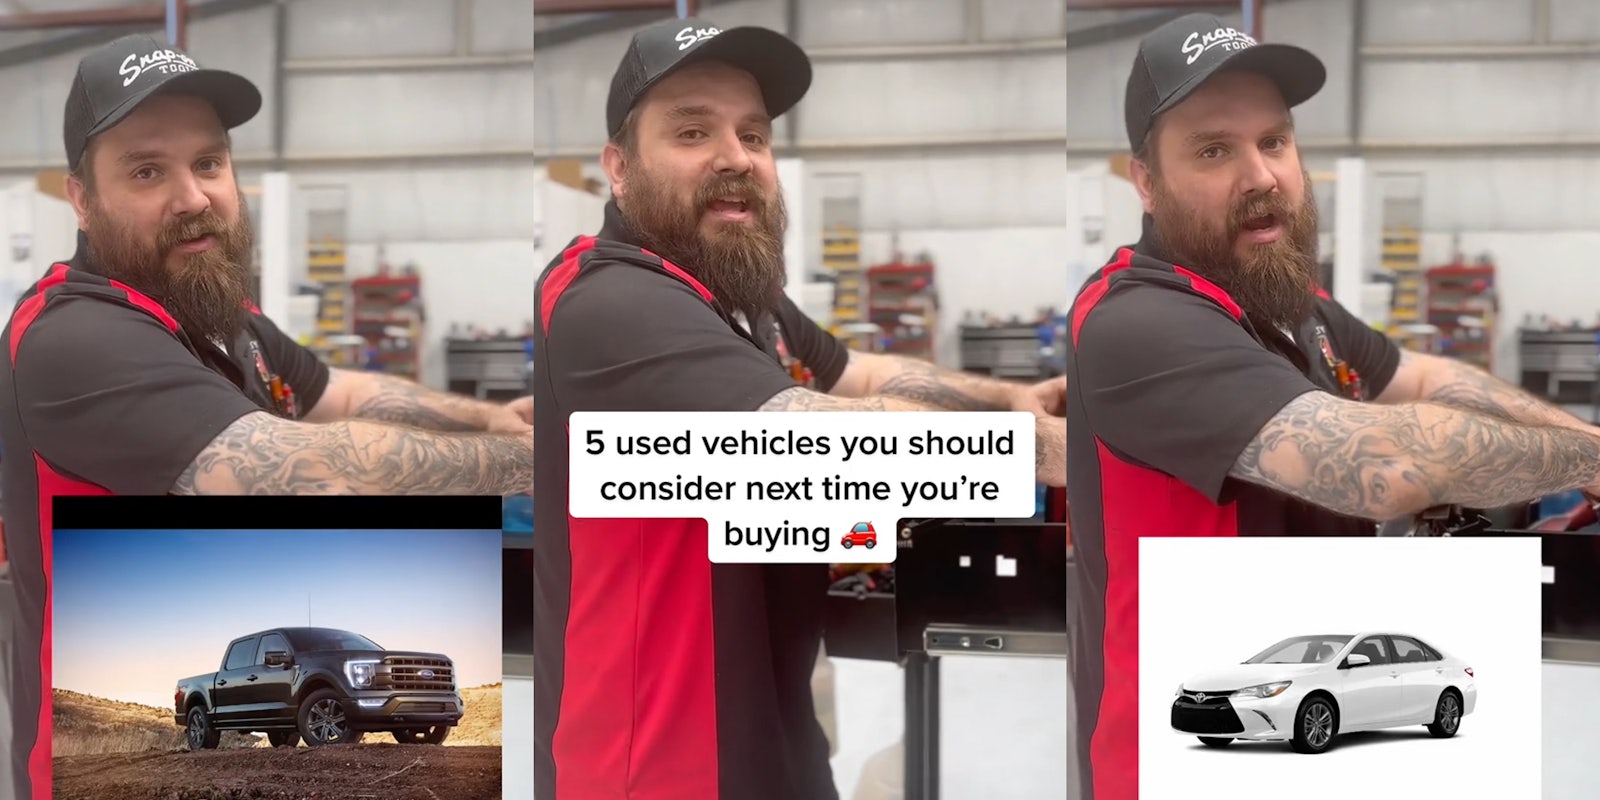 Mechanic speaking in shop with image of F150 (l) Mechanic speaking in shop with caption '5 used vehicles you should consider next time you're buying' (c) Mechanic speaking in shop with image of Toyota Camry (r)